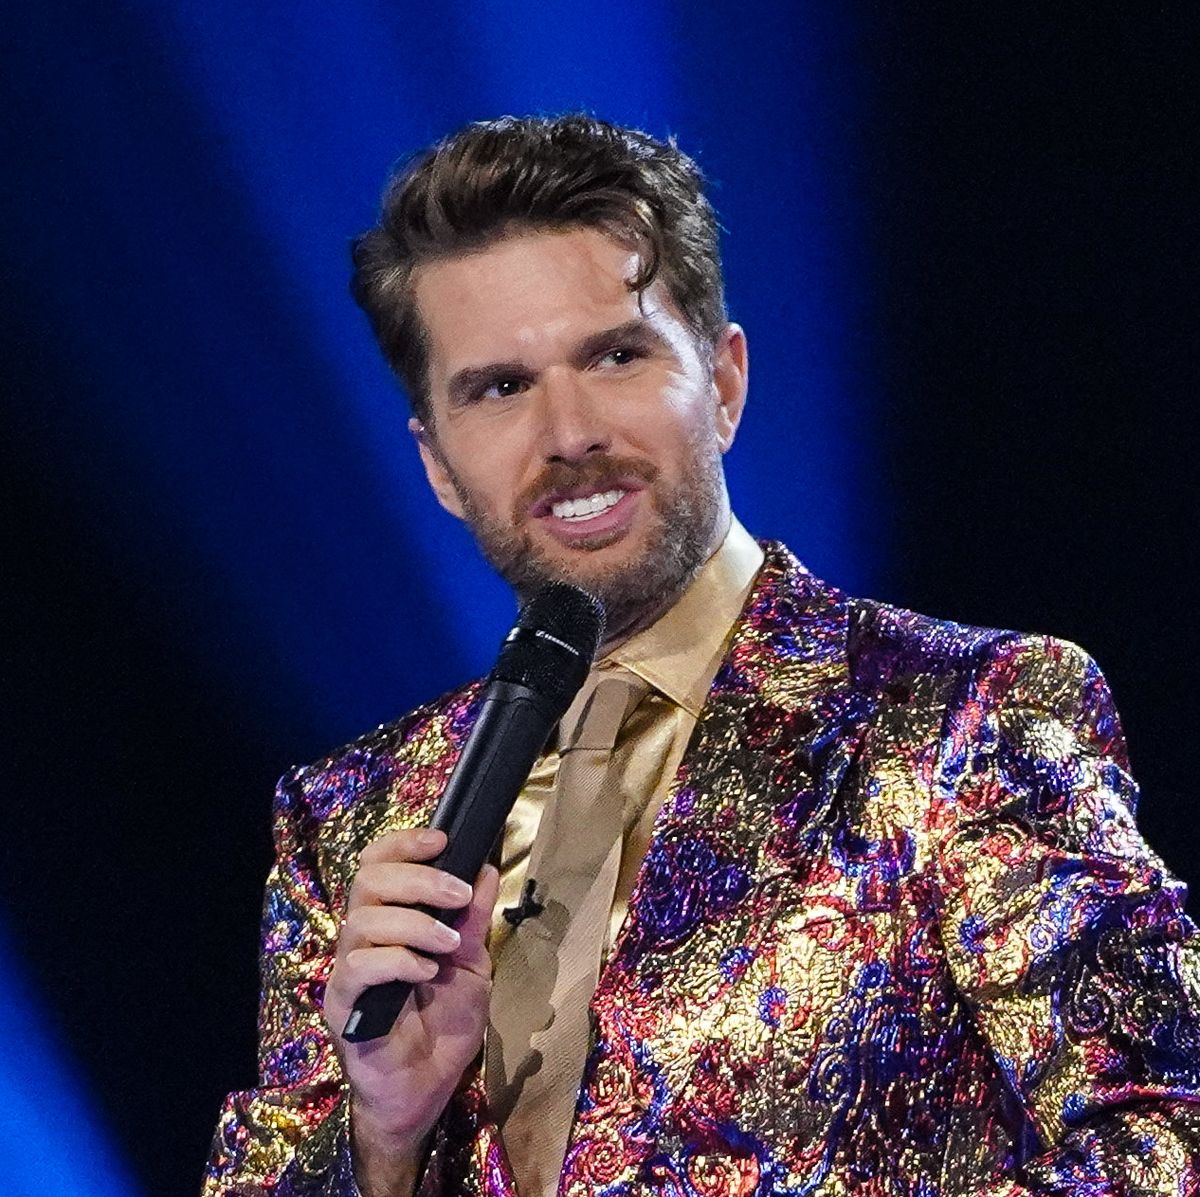 The Masked Singer UK unveils another famous face